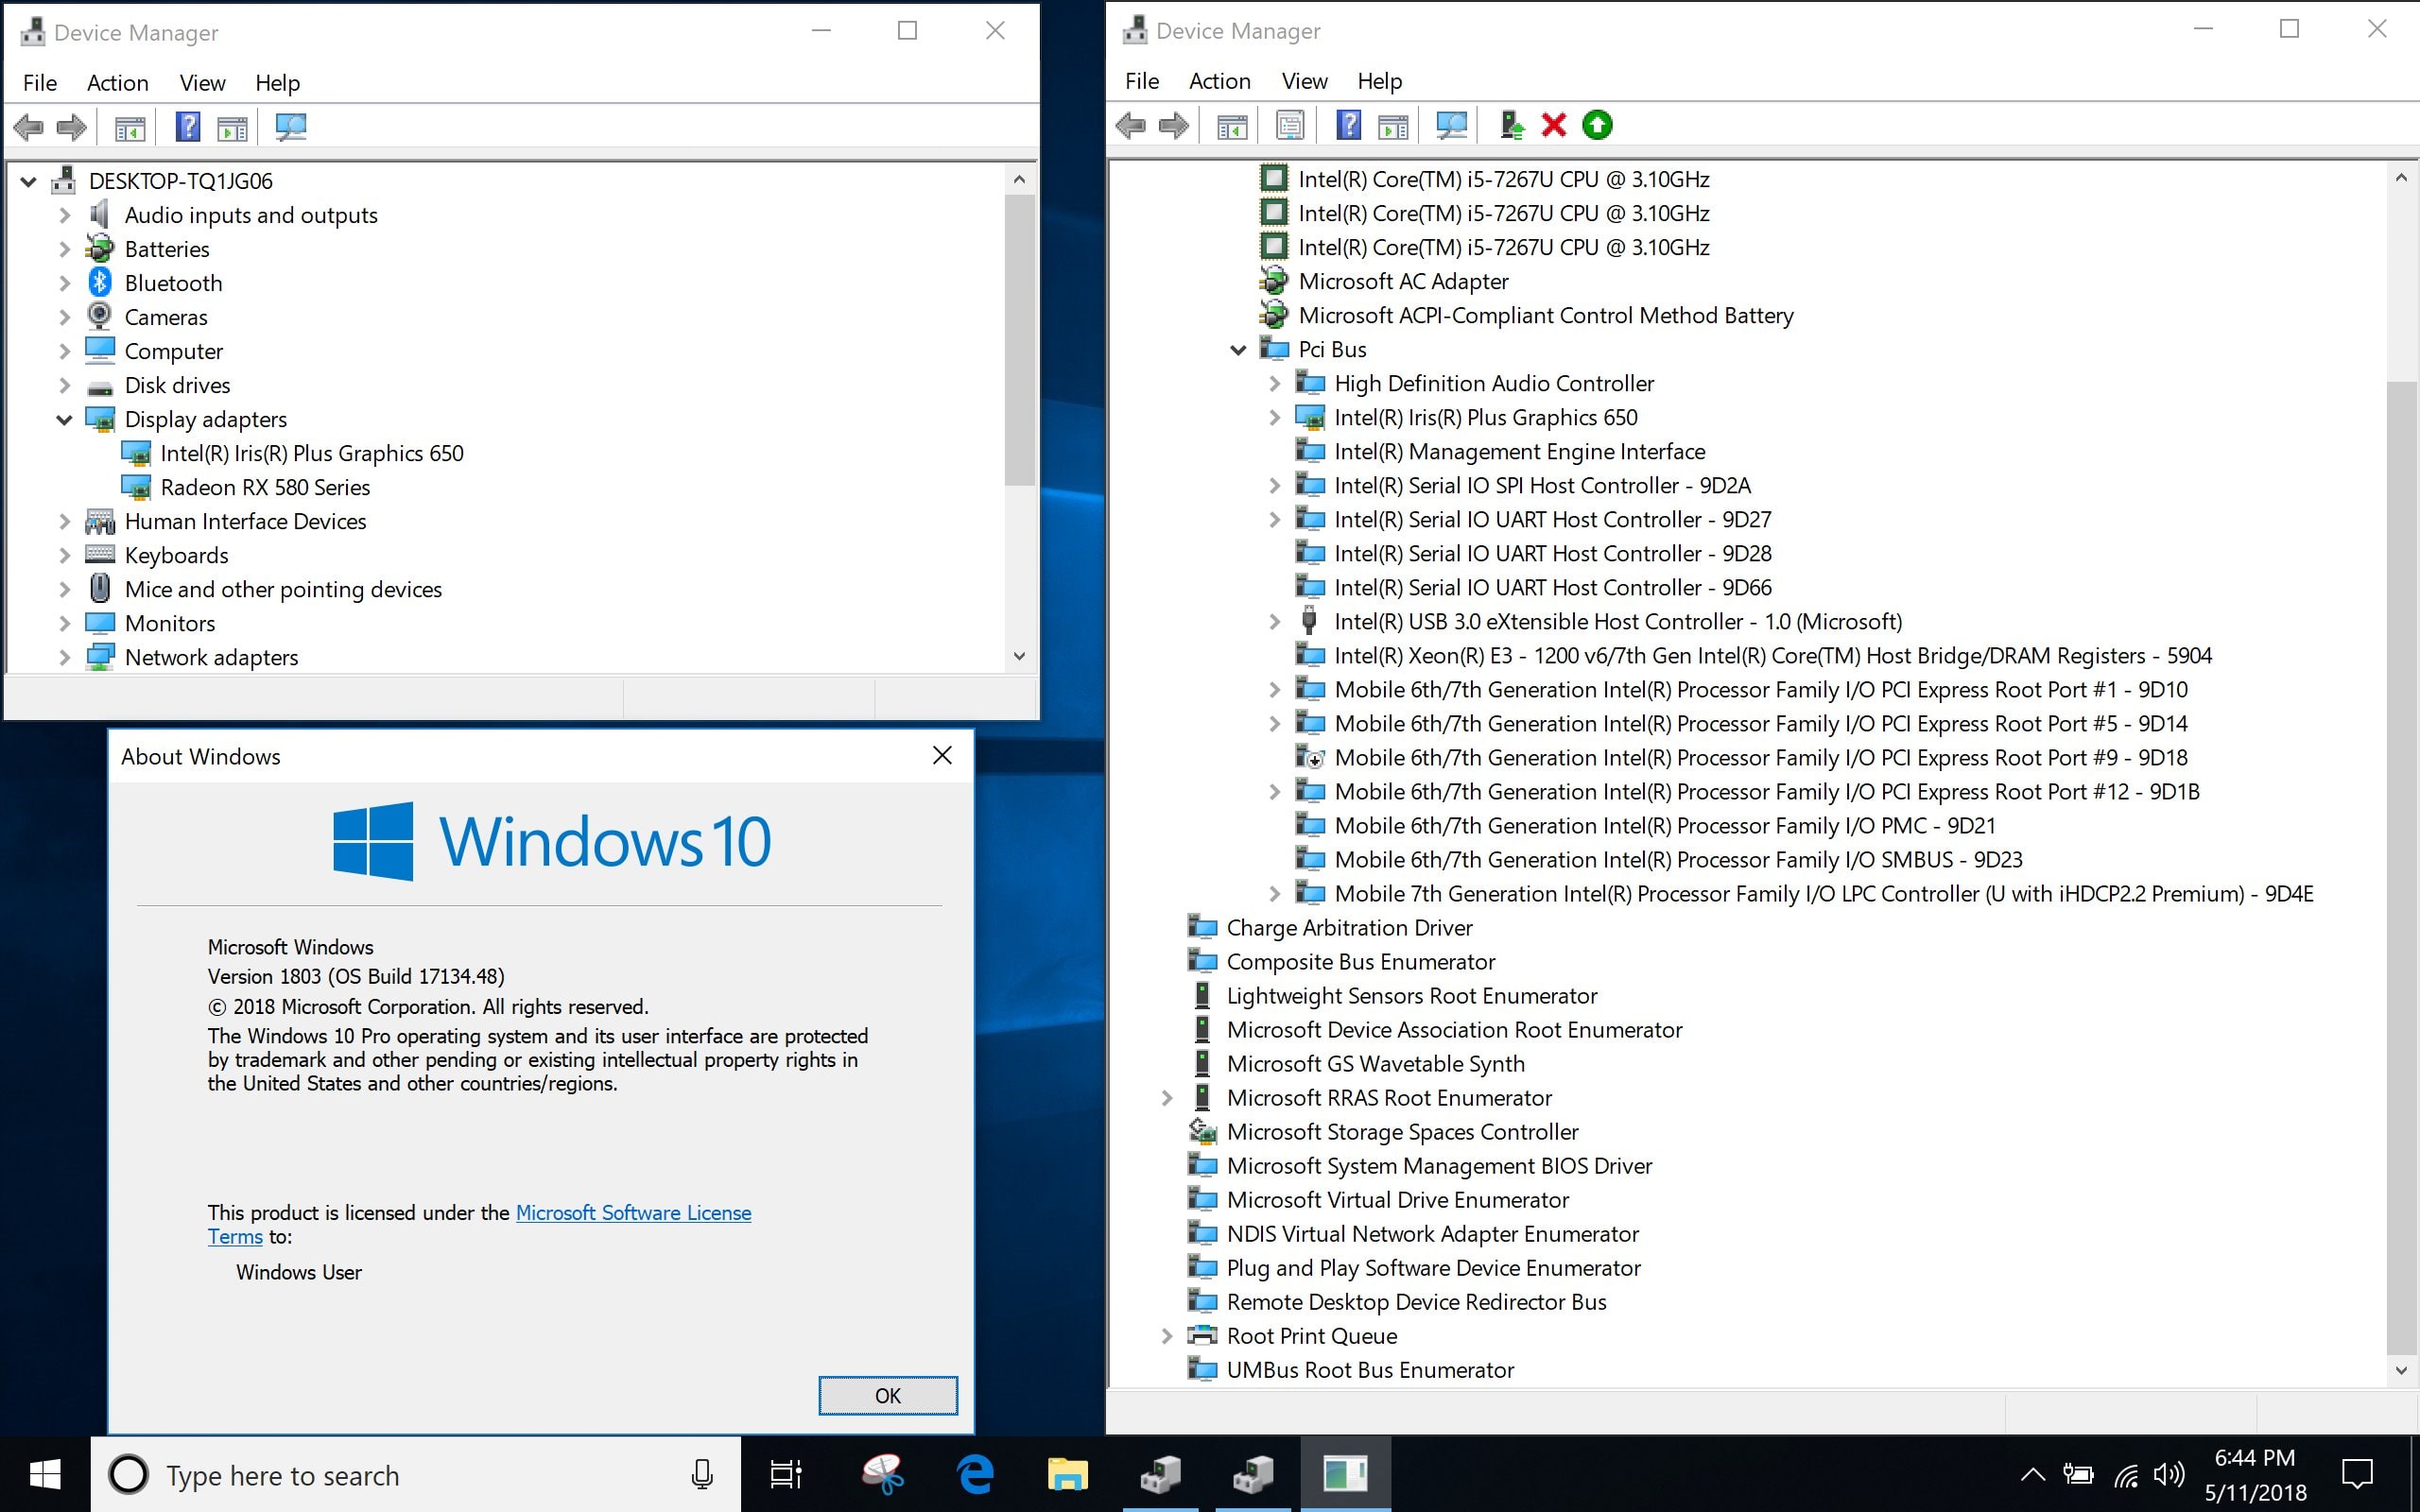 windows 10 iso file for bootcamp